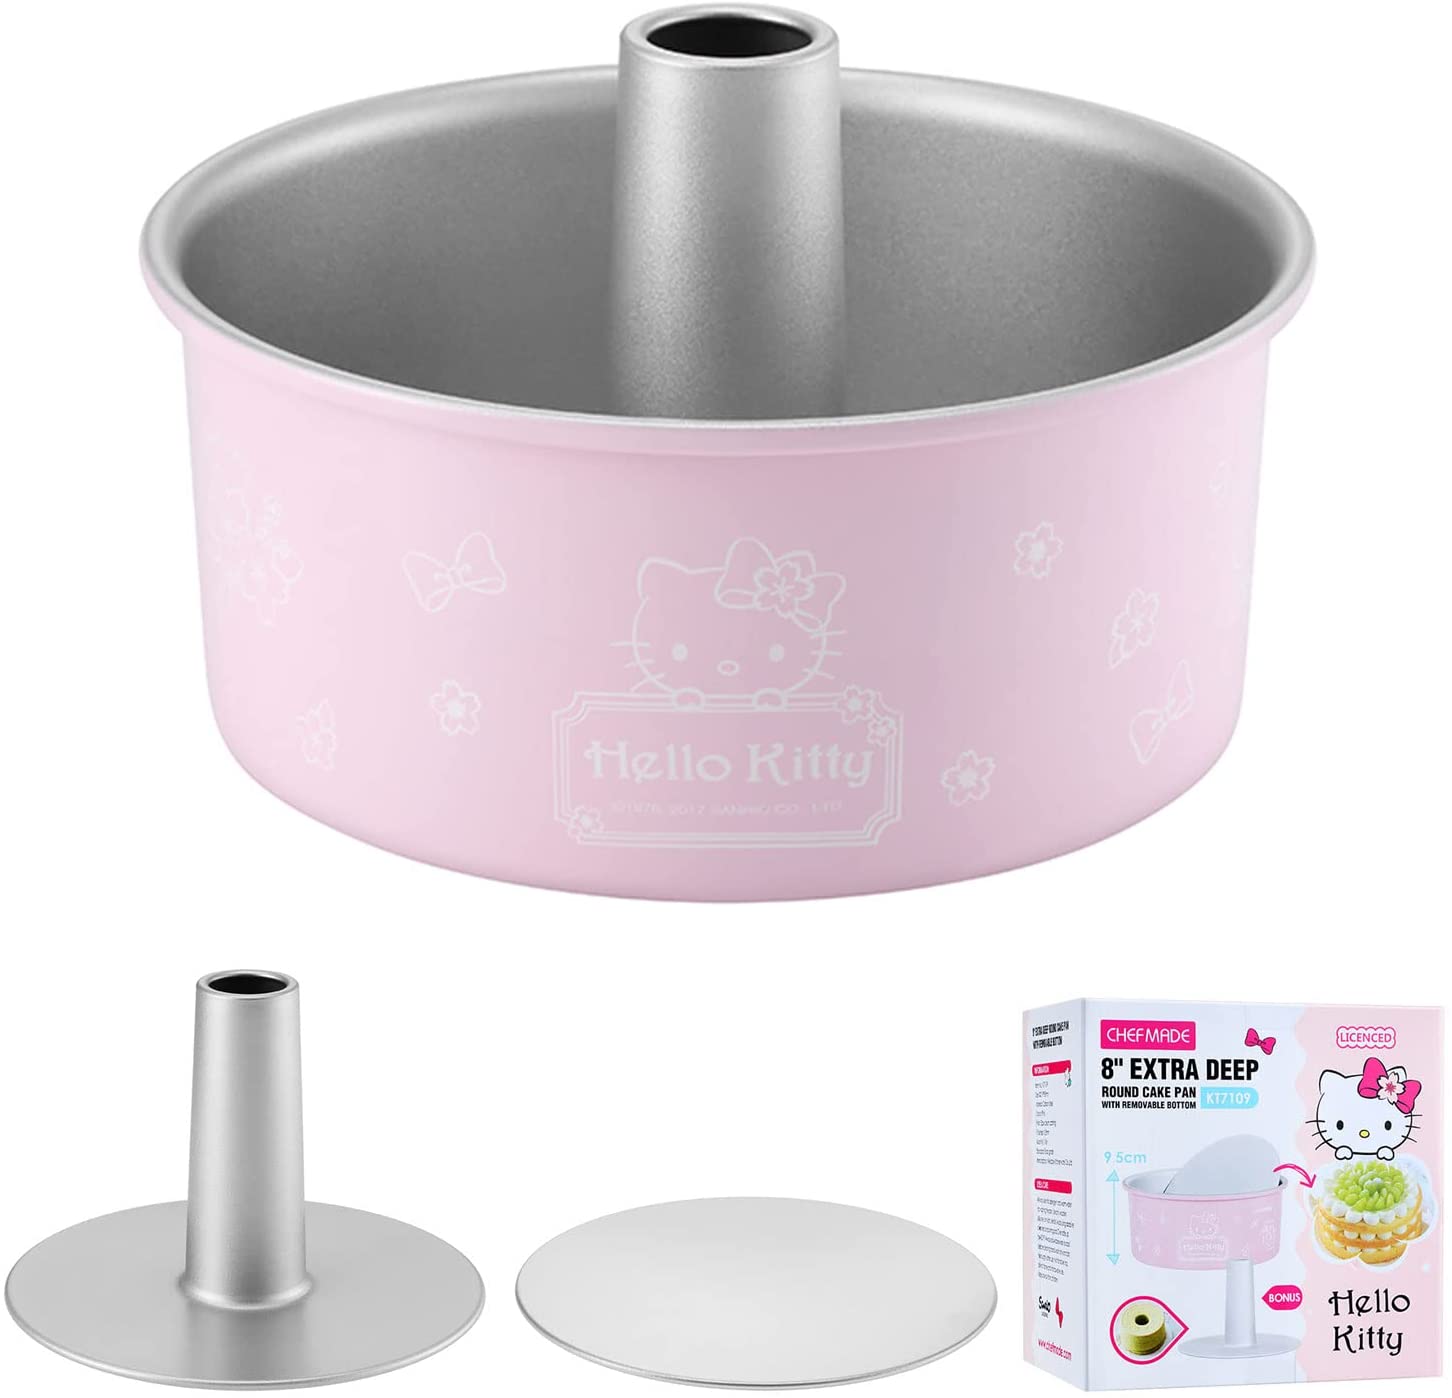 8" Hello Kitty Angel Food Cake Pan with 2 Removable Loose Bottoms